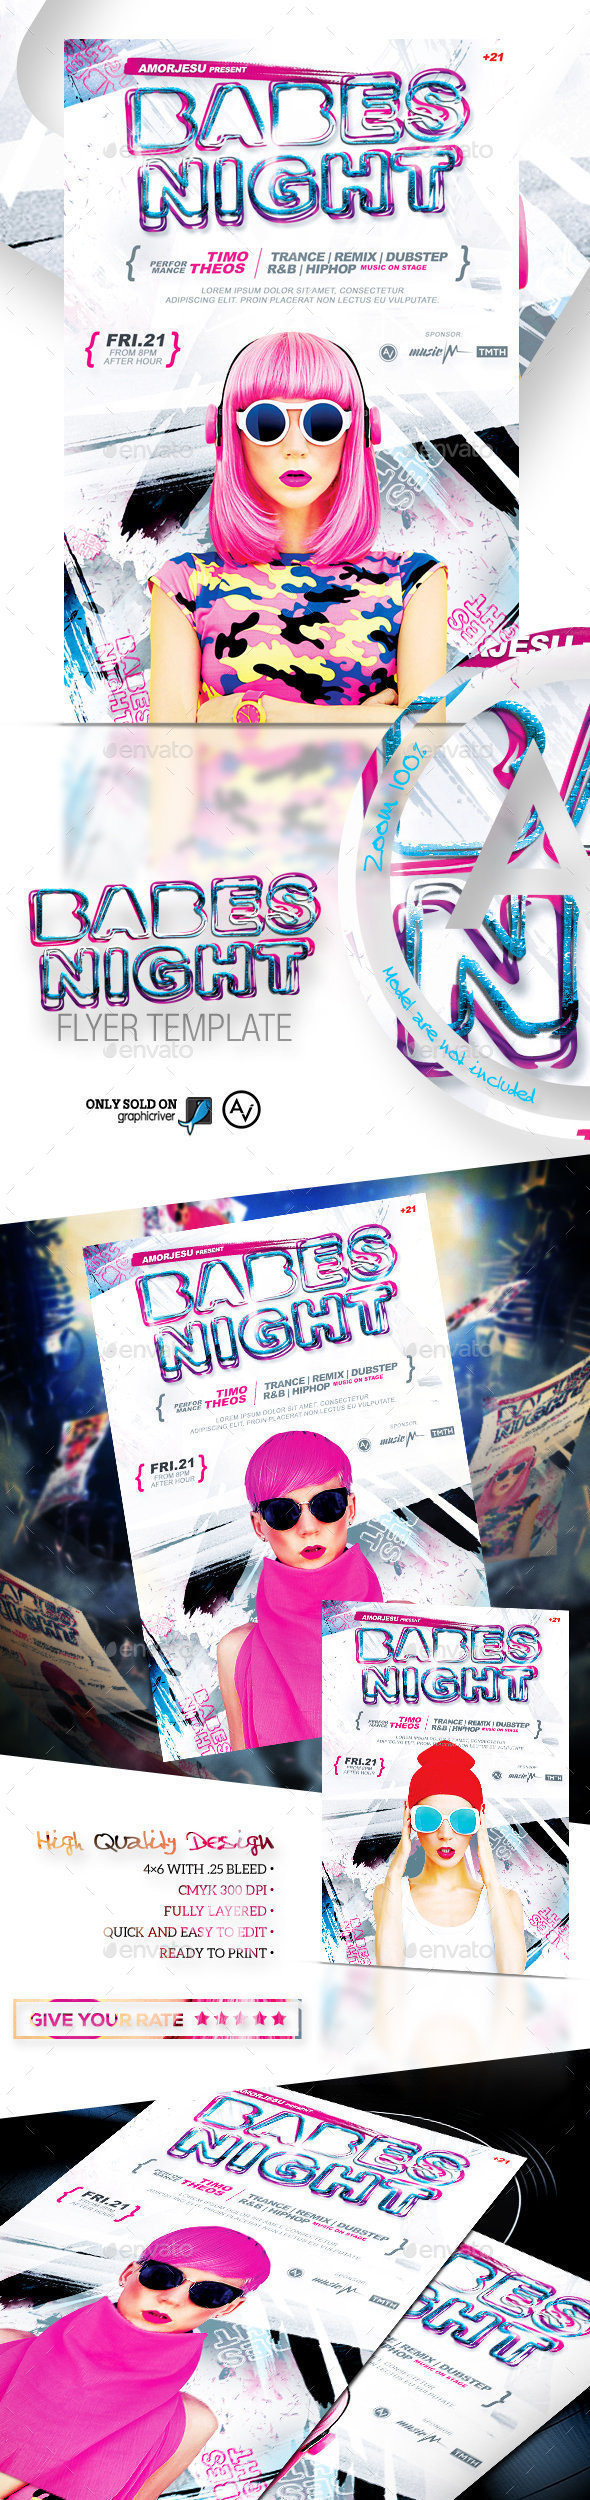 Preview 20  20babes 20night 20flyer 20template 20 design 20by 20amorjesu 